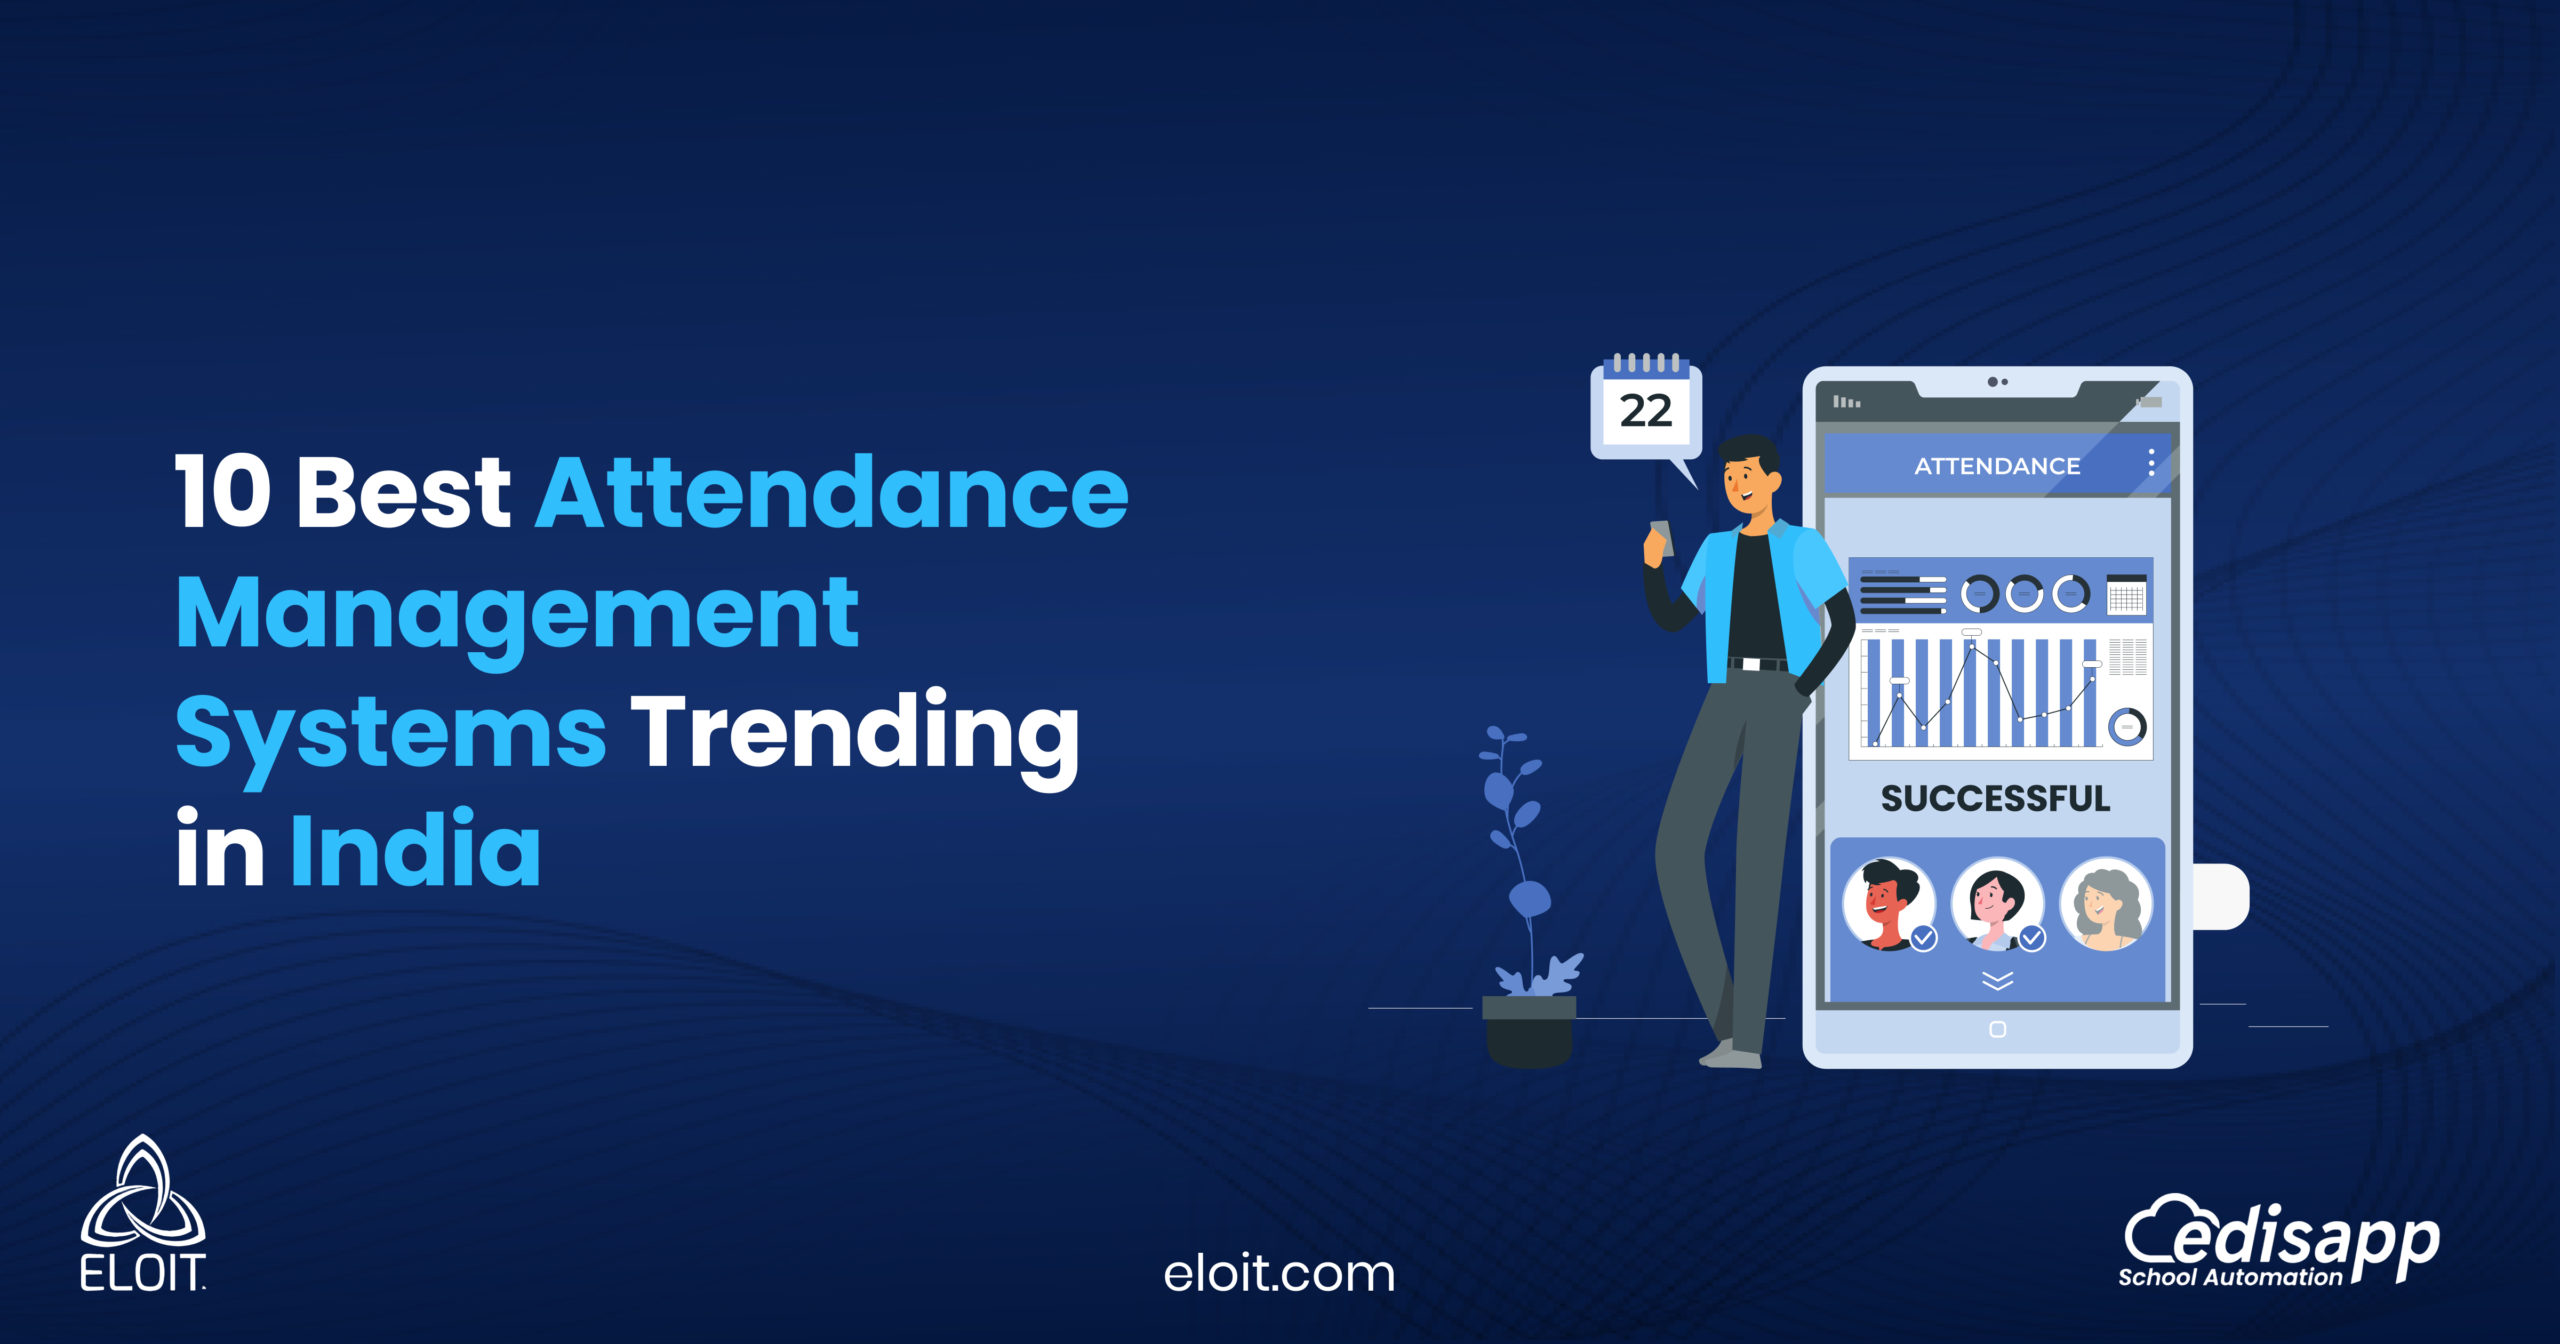 10 Best Attendance Management Systems For Schools in 2022